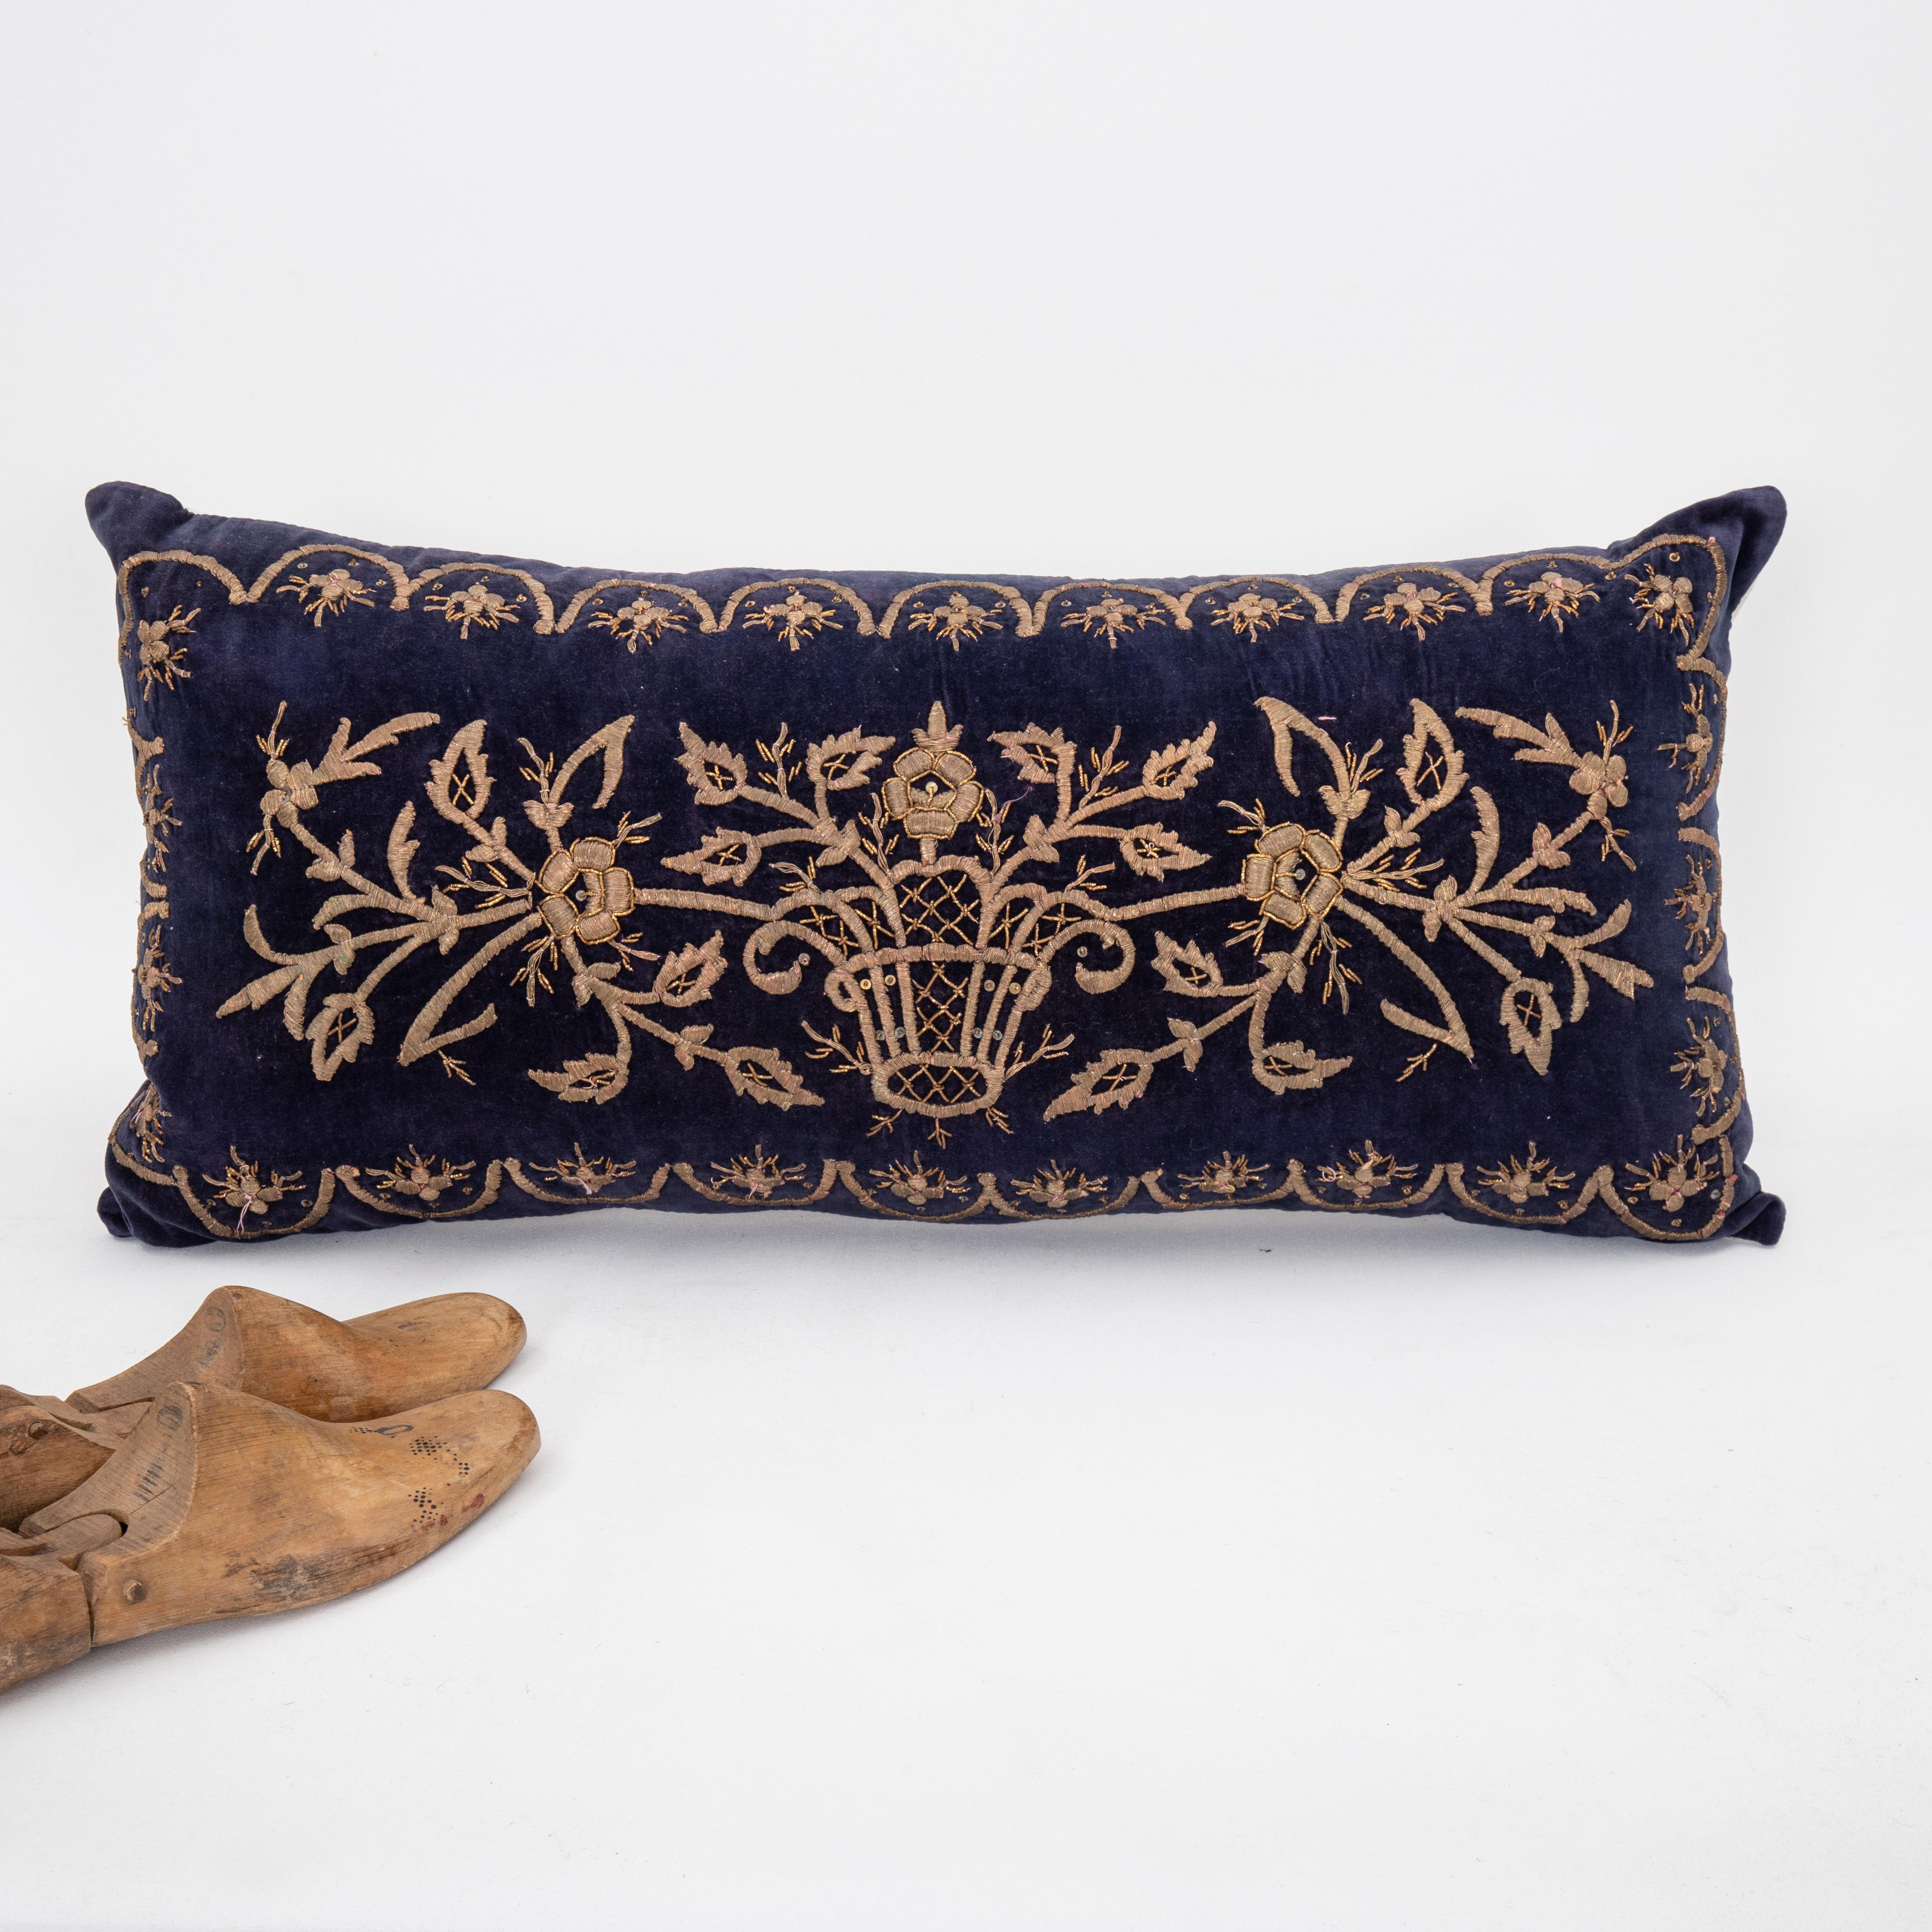 Ottoman Pillow Cover in Sarma Technique, late 19th / Early 20th C. For Sale 1